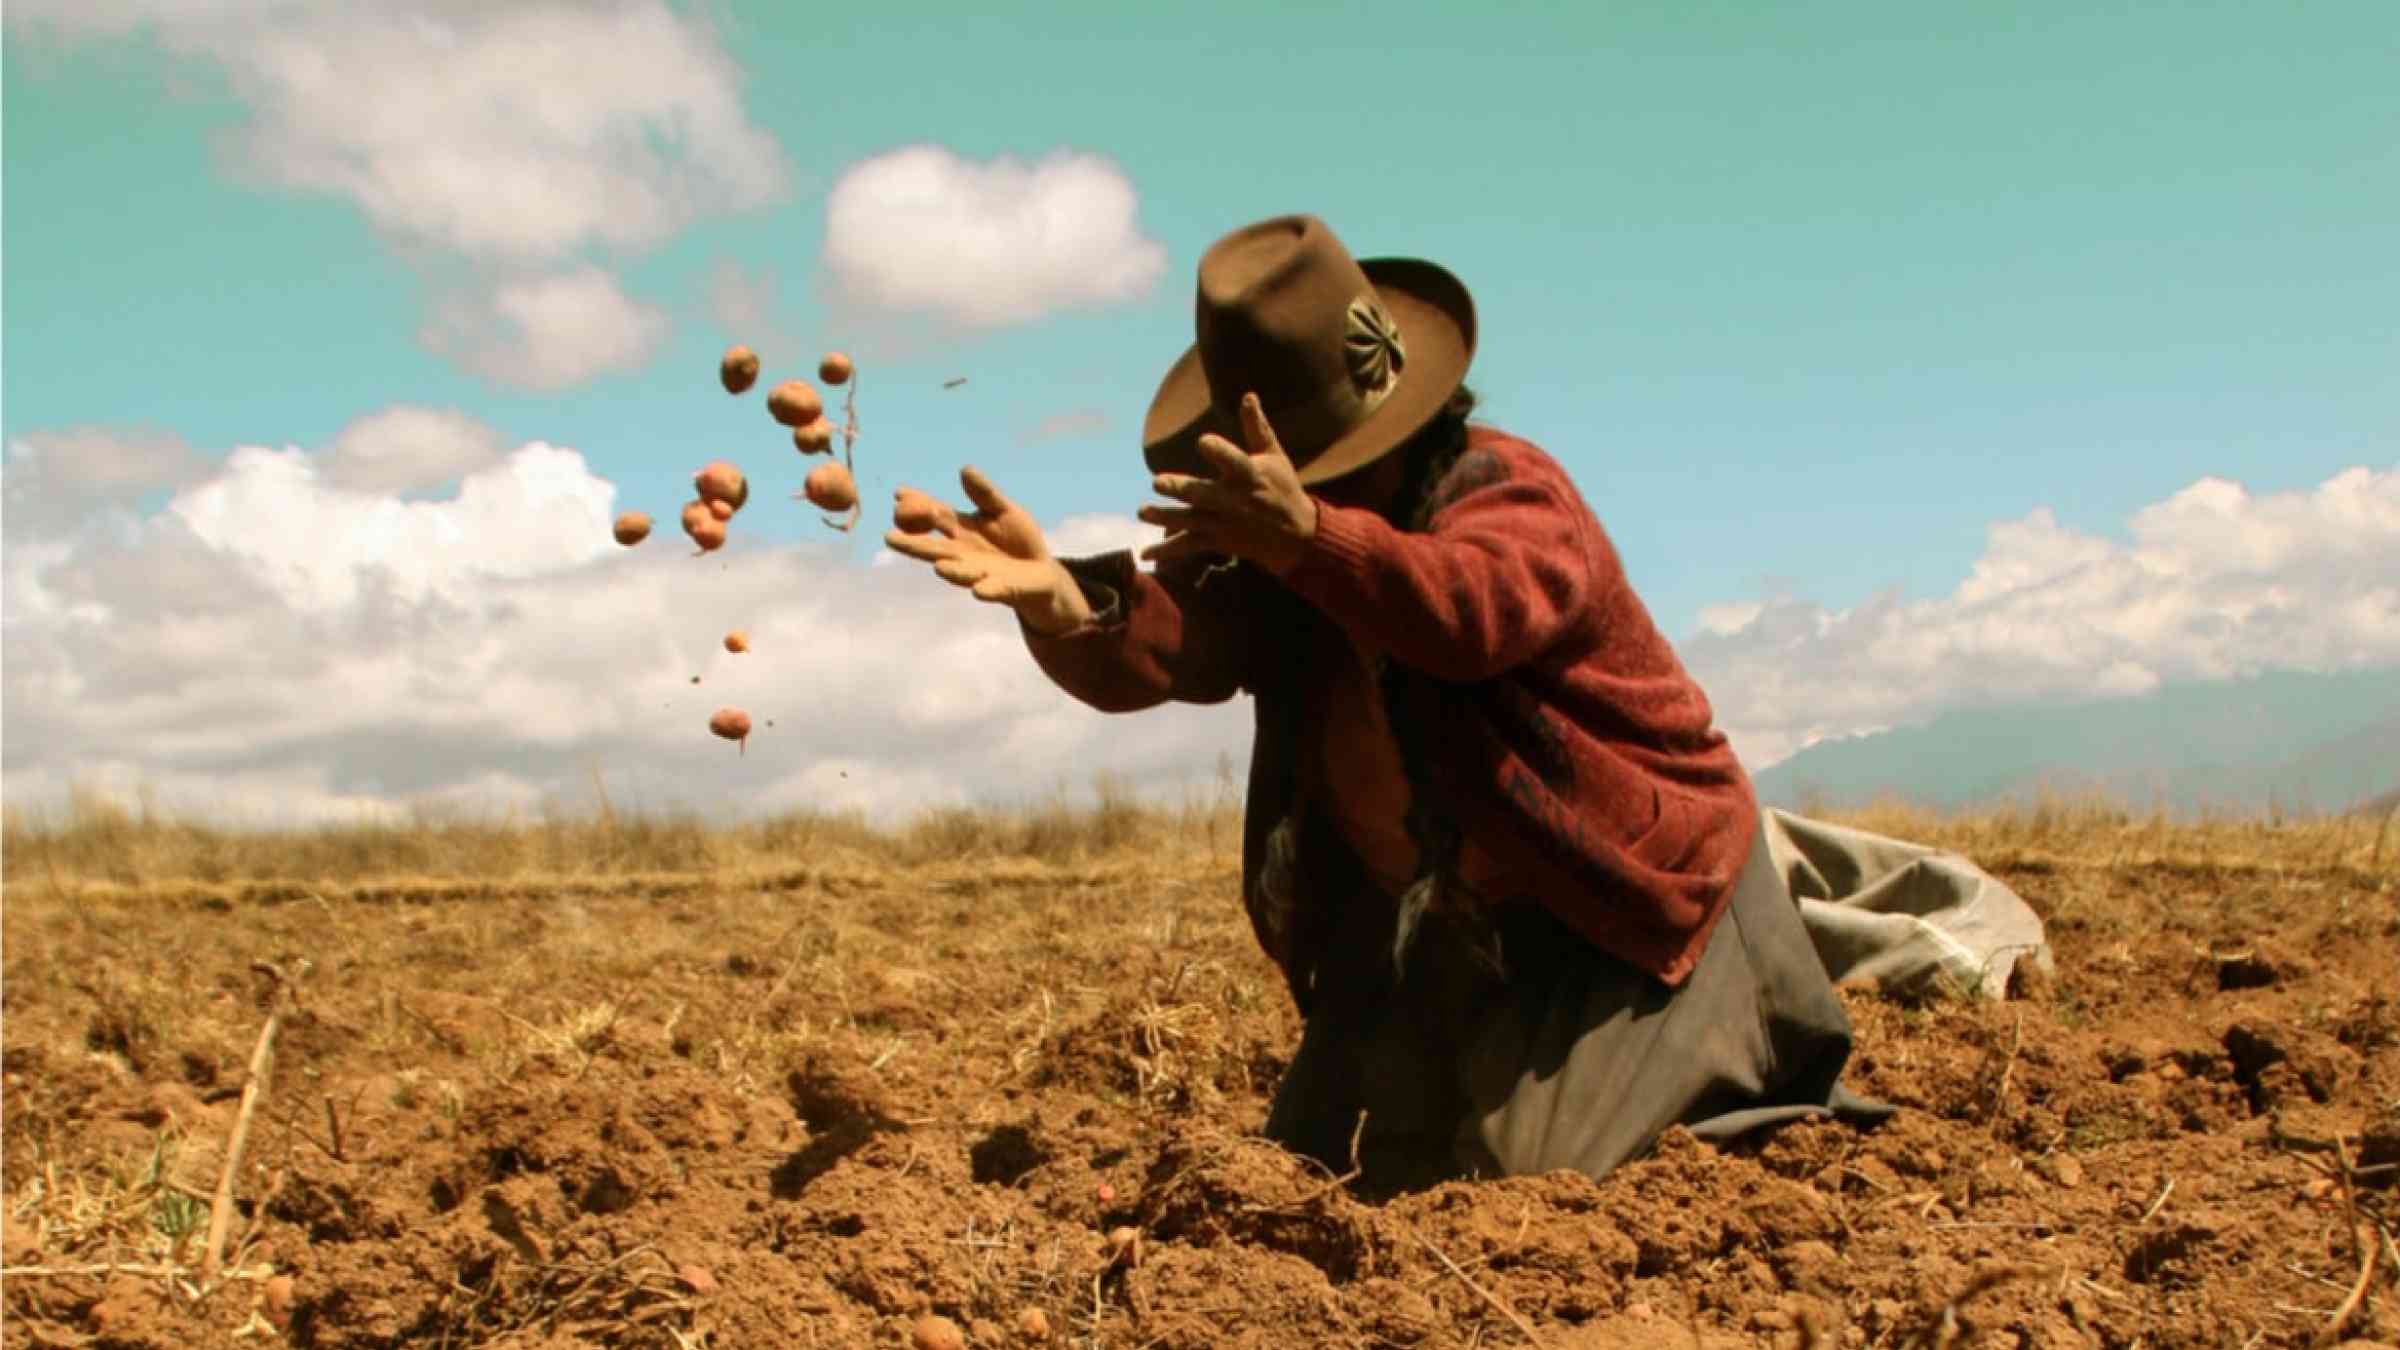 Woman in the Andes doing potato harvest